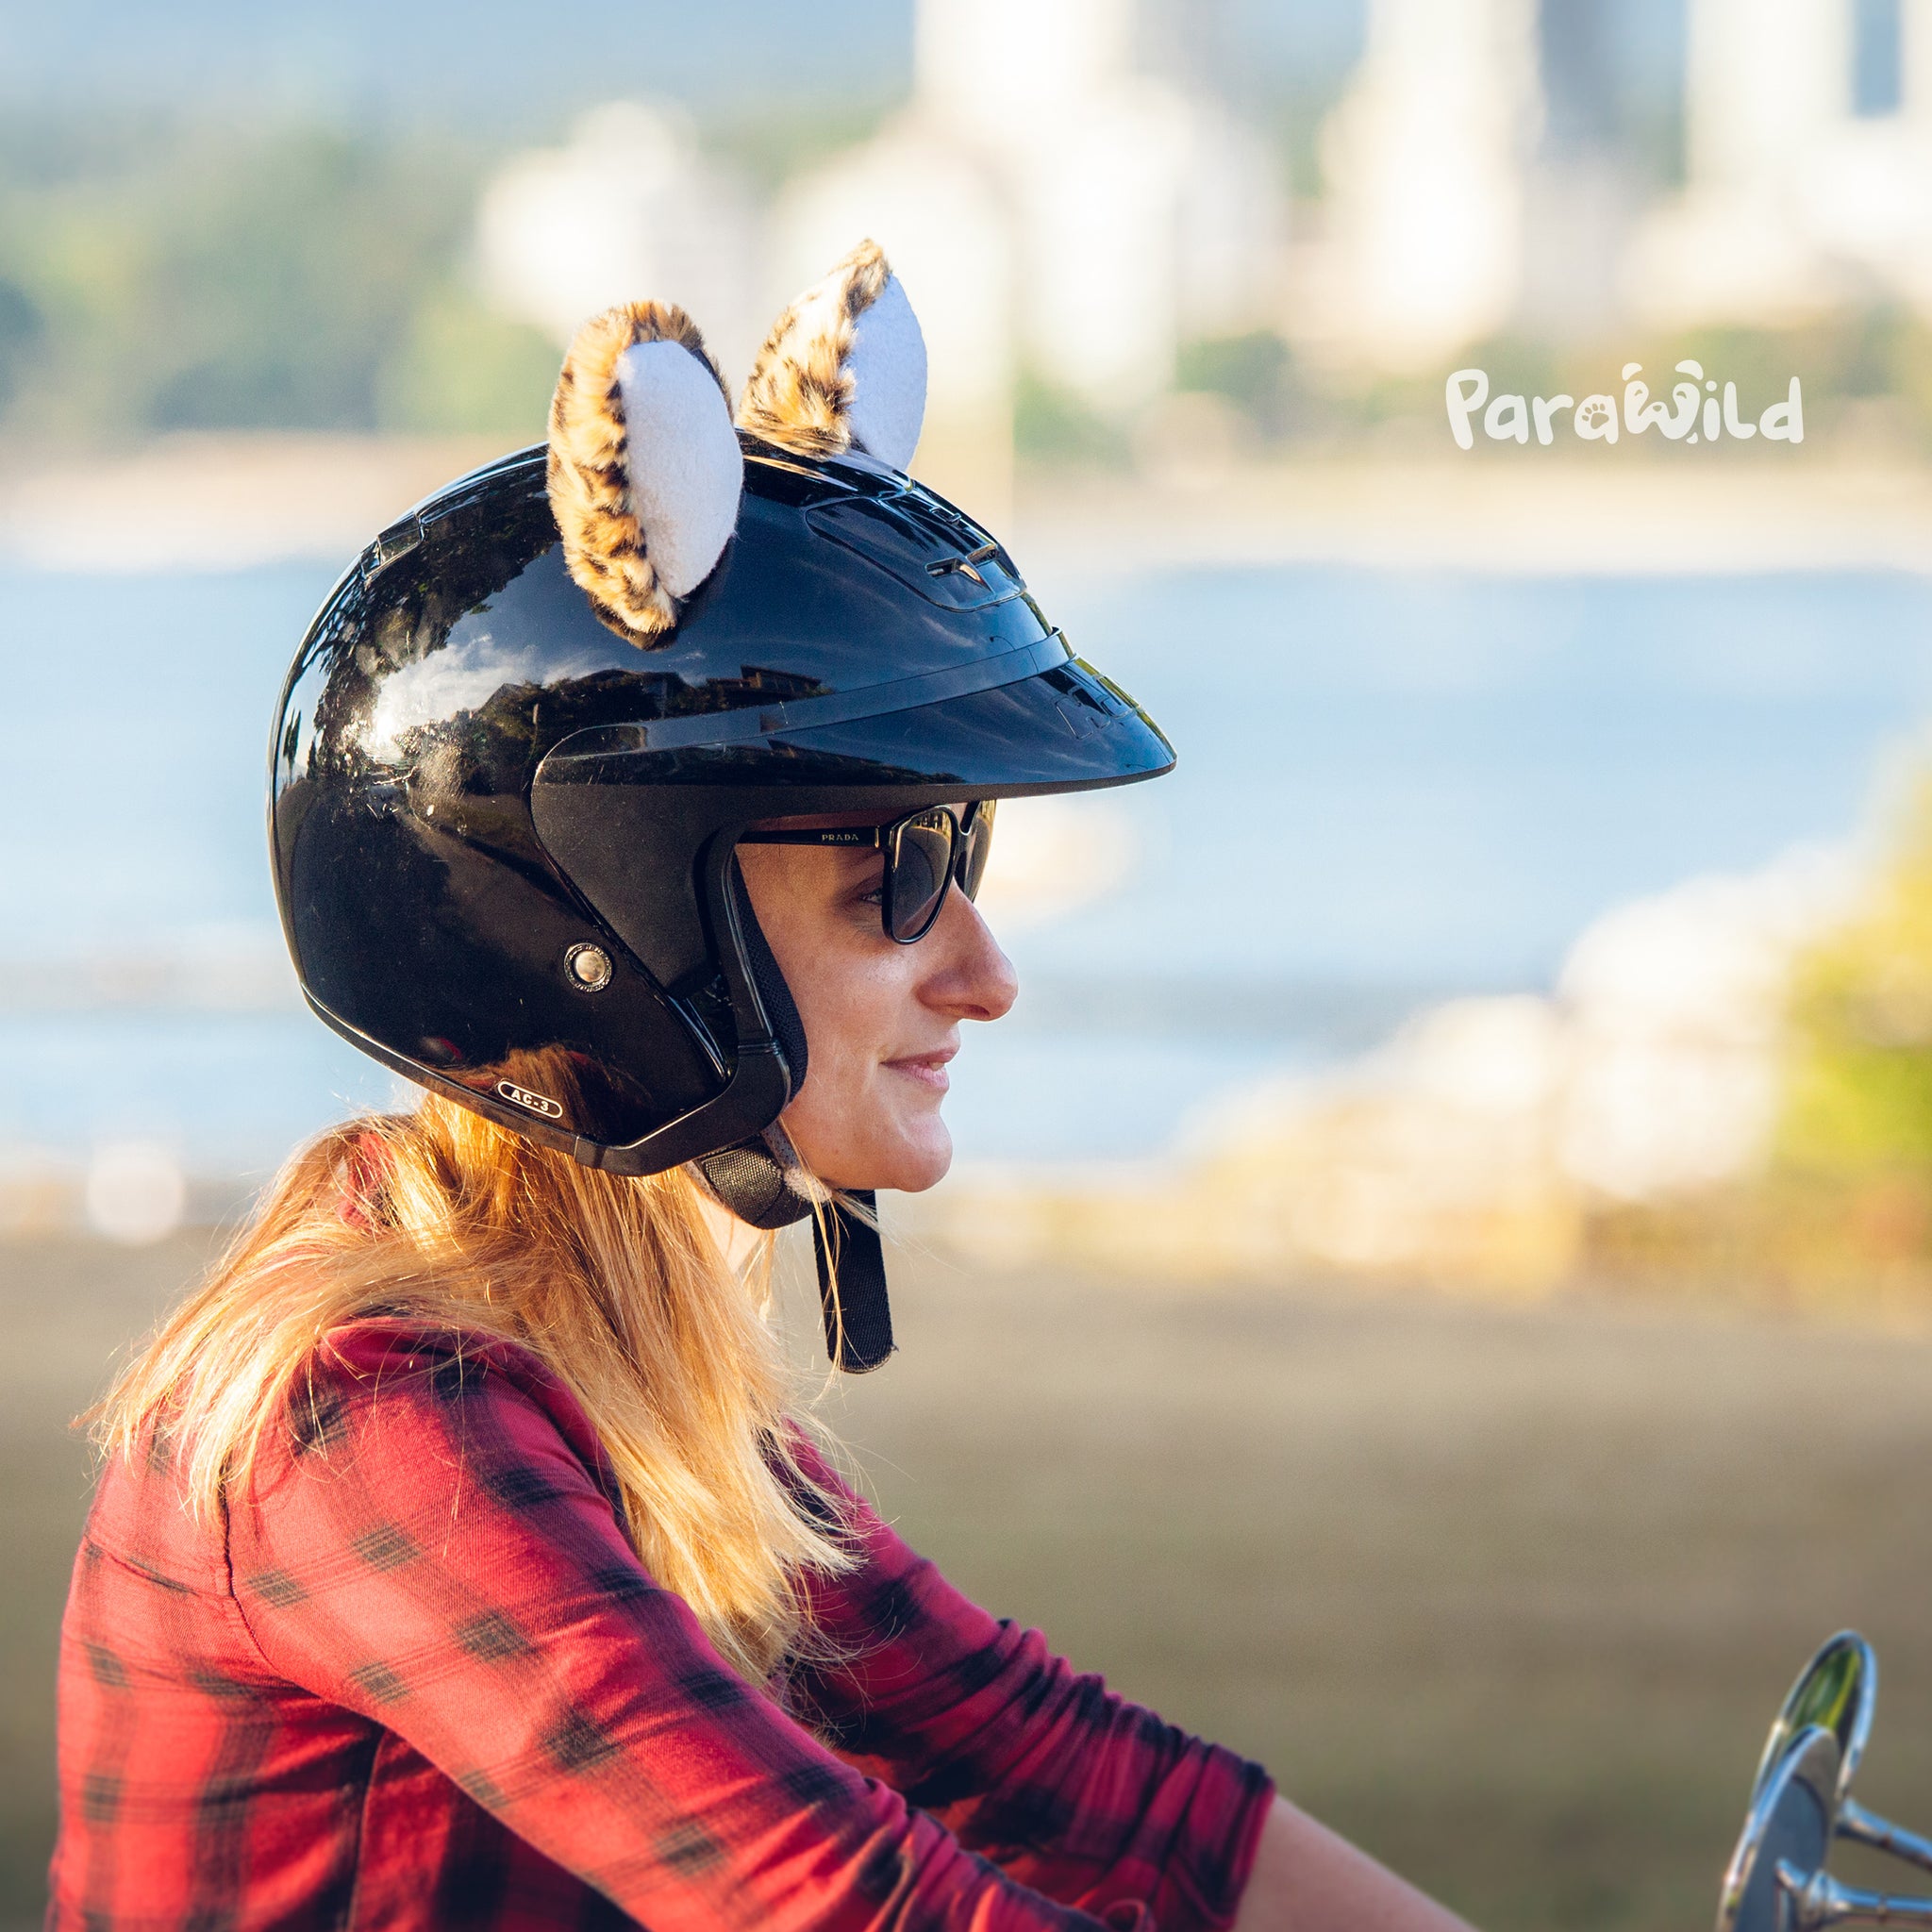 Fun Helmet Cat Ears/Covers/Accessories for Kids and Adults | ParaWilds ParaWild USA